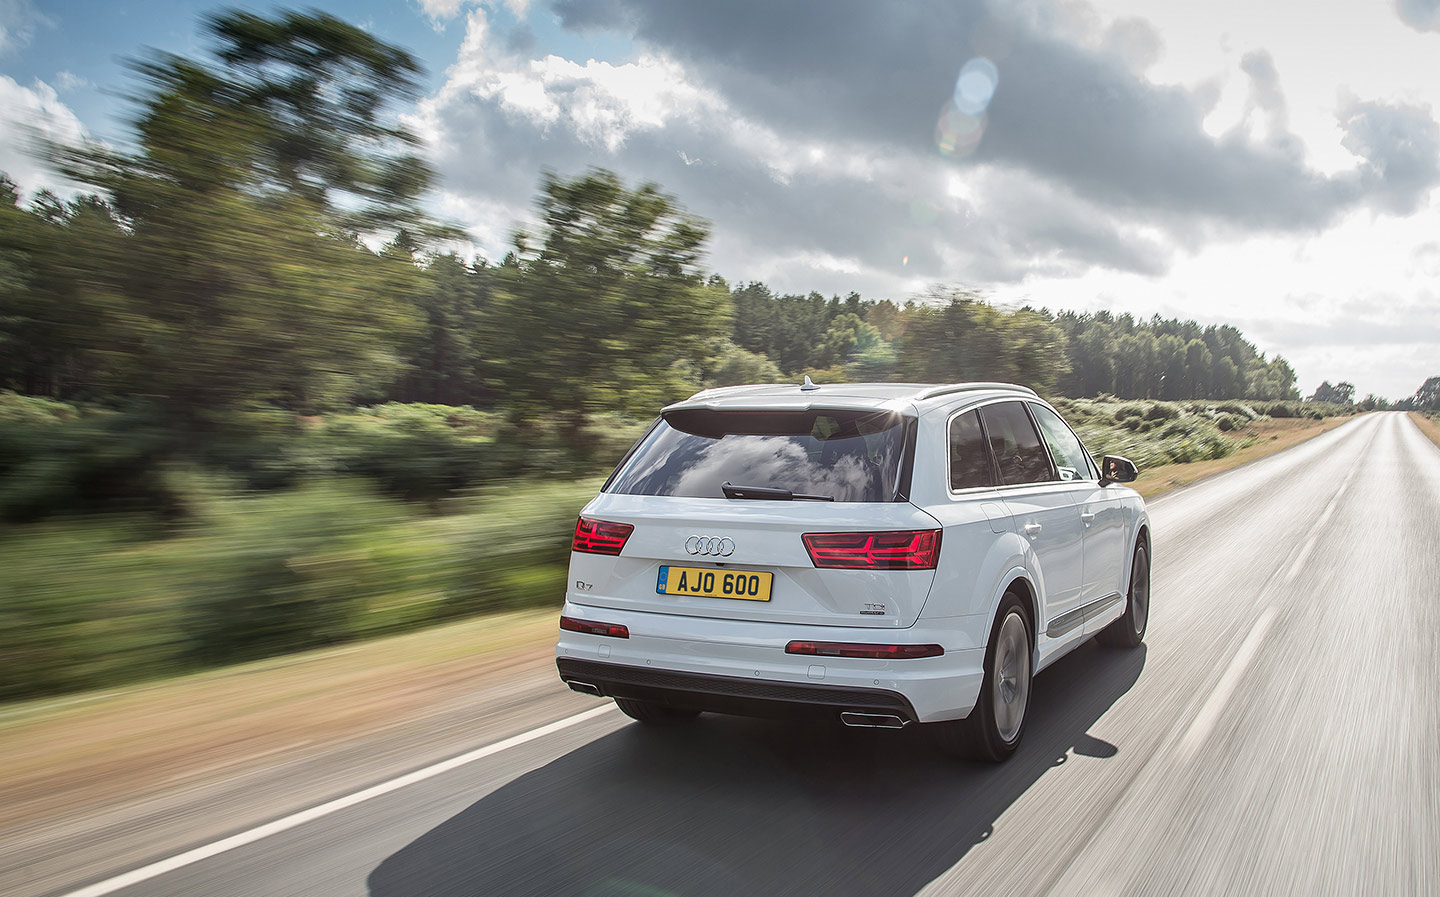 The AA Gill Review: 2016 Audi Q7